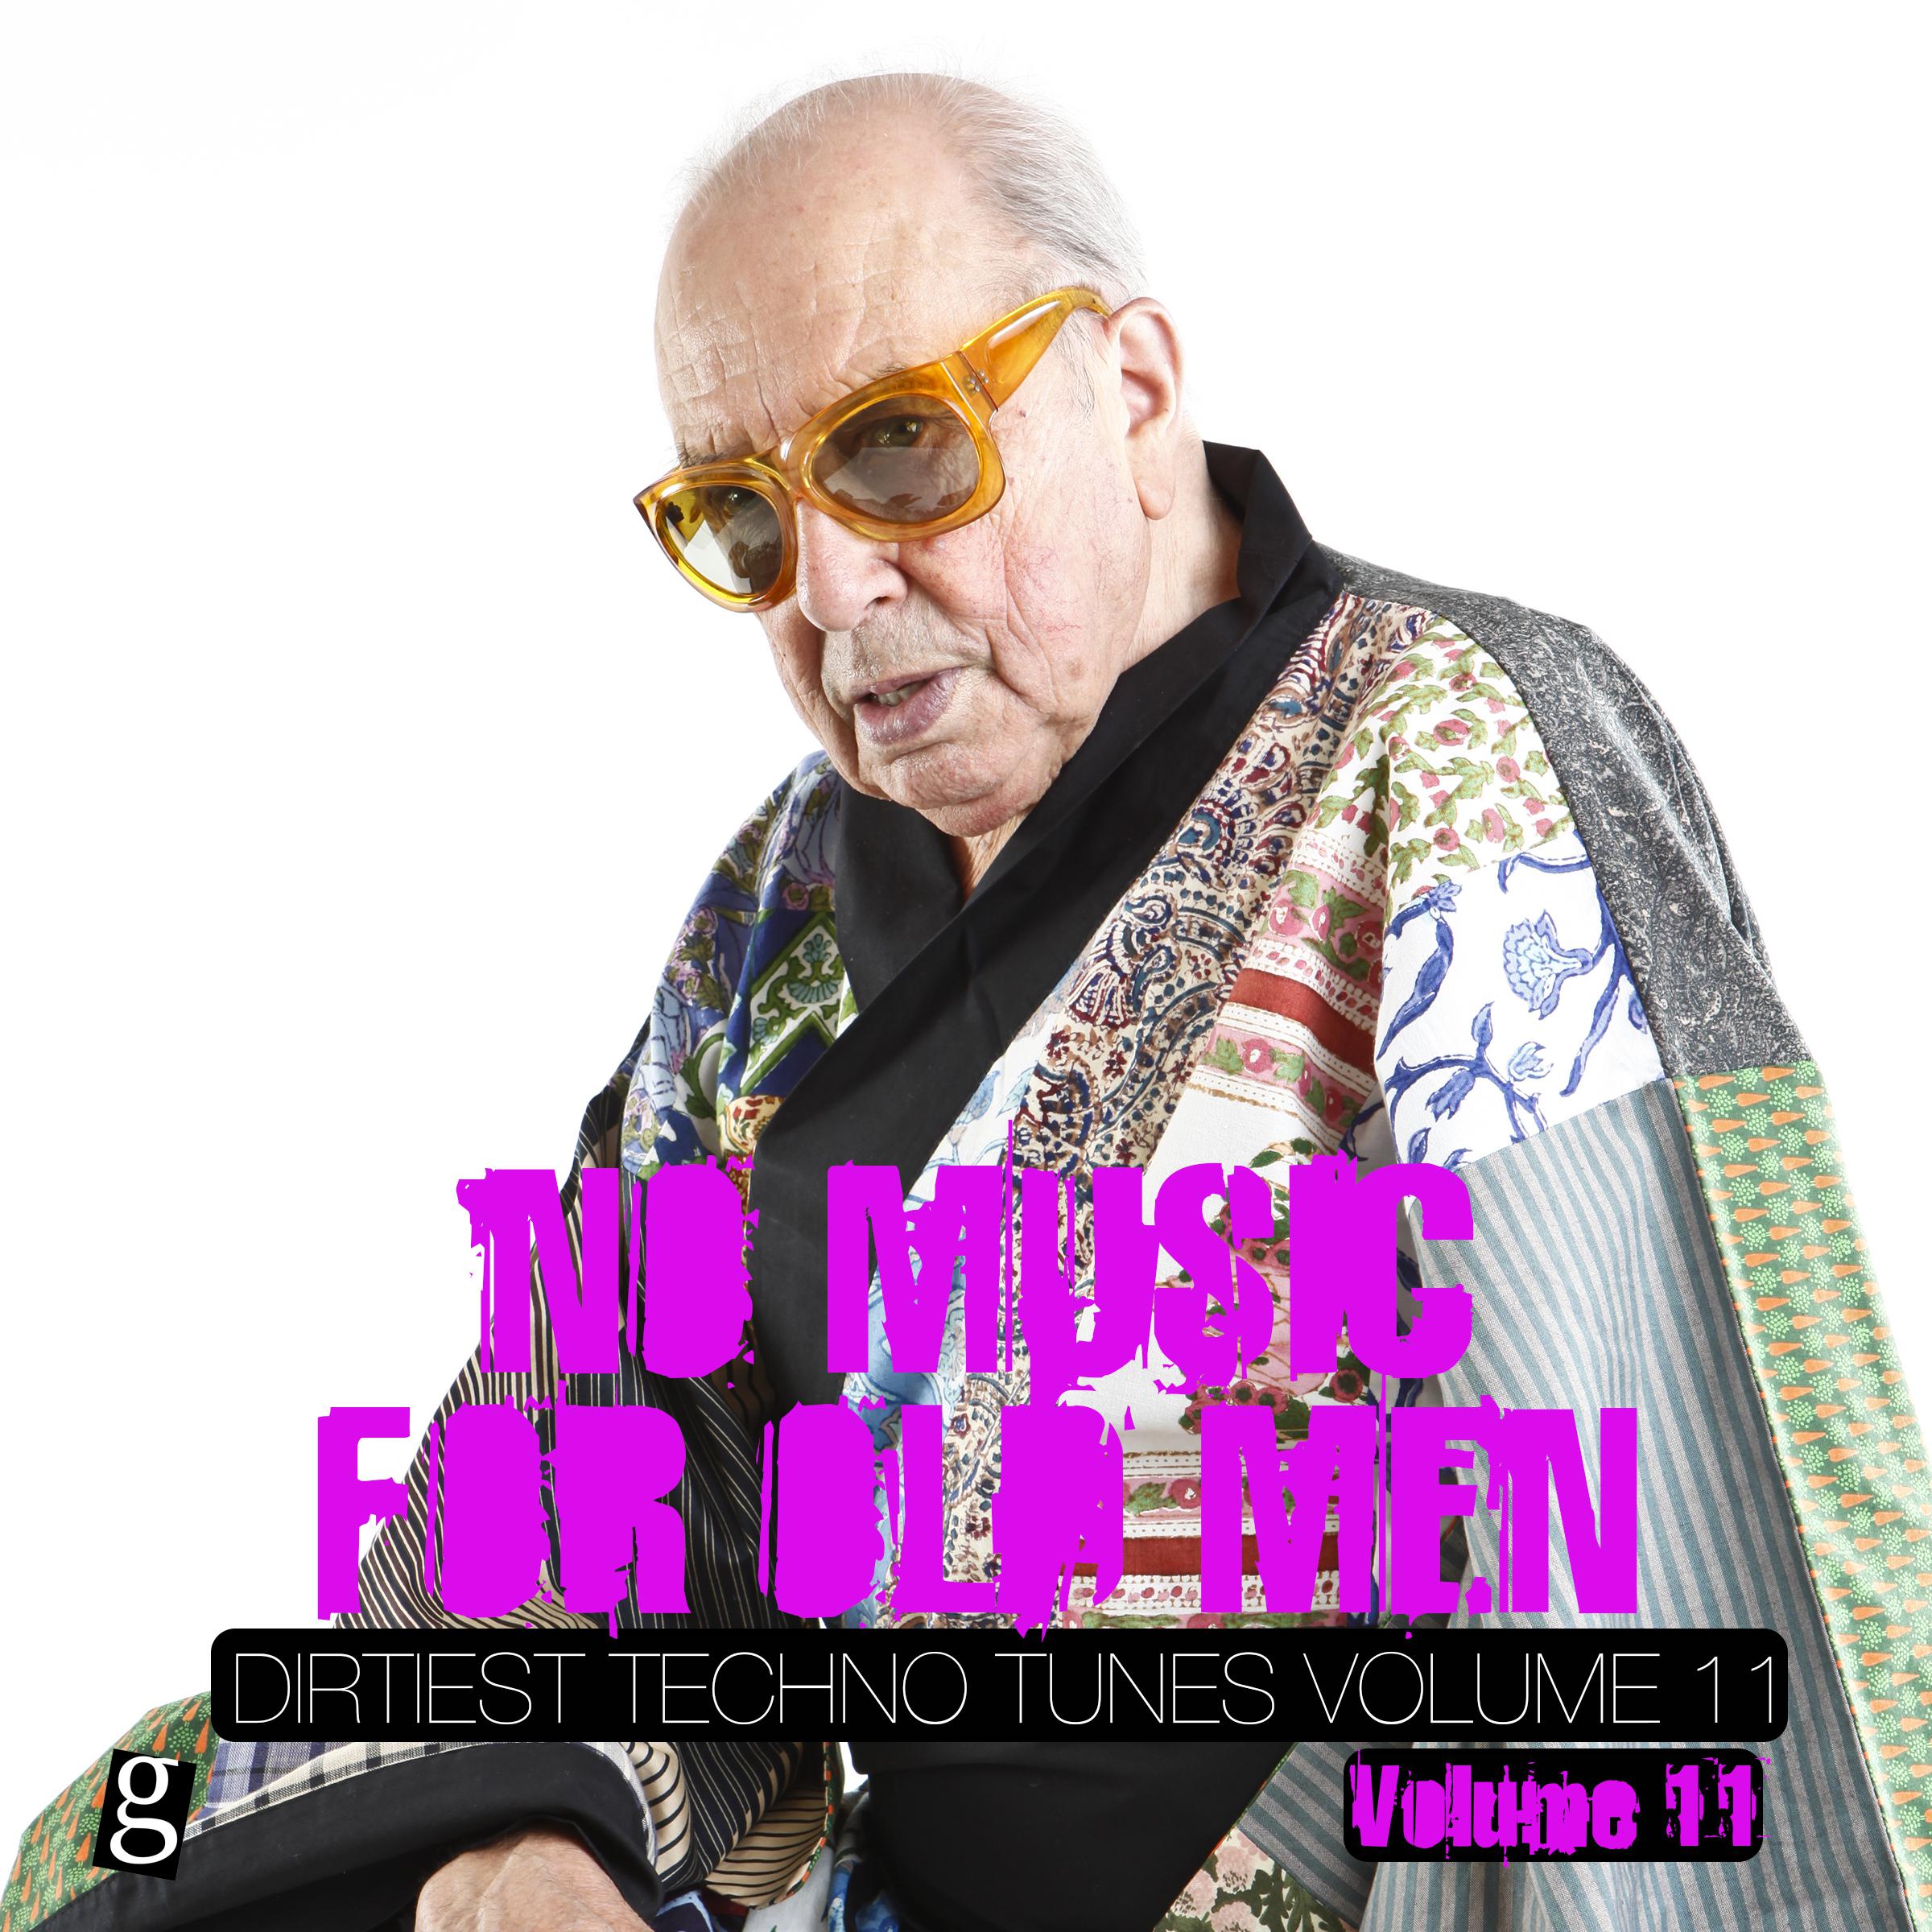 No Music for Old Men, Vol. 11 - Dirtiest Techno Tunes